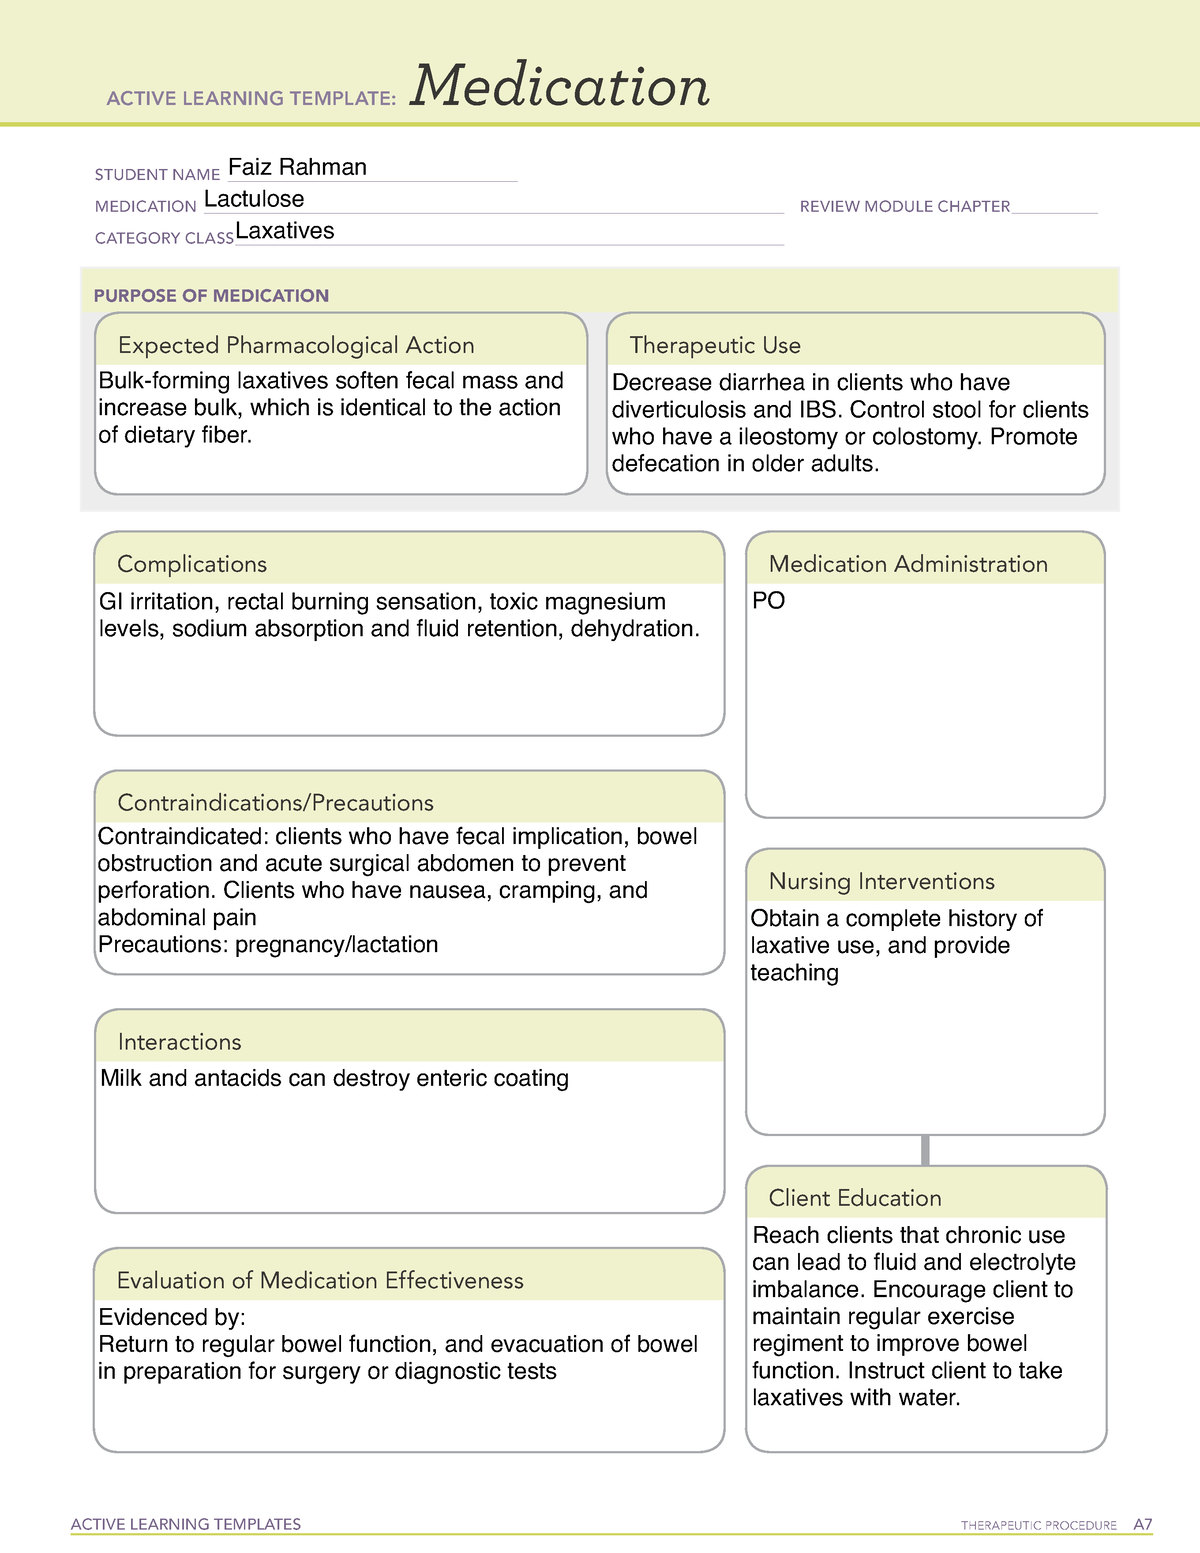 Lactulose Drug template ACTIVE LEARNING TEMPLATES THERAPEUTIC